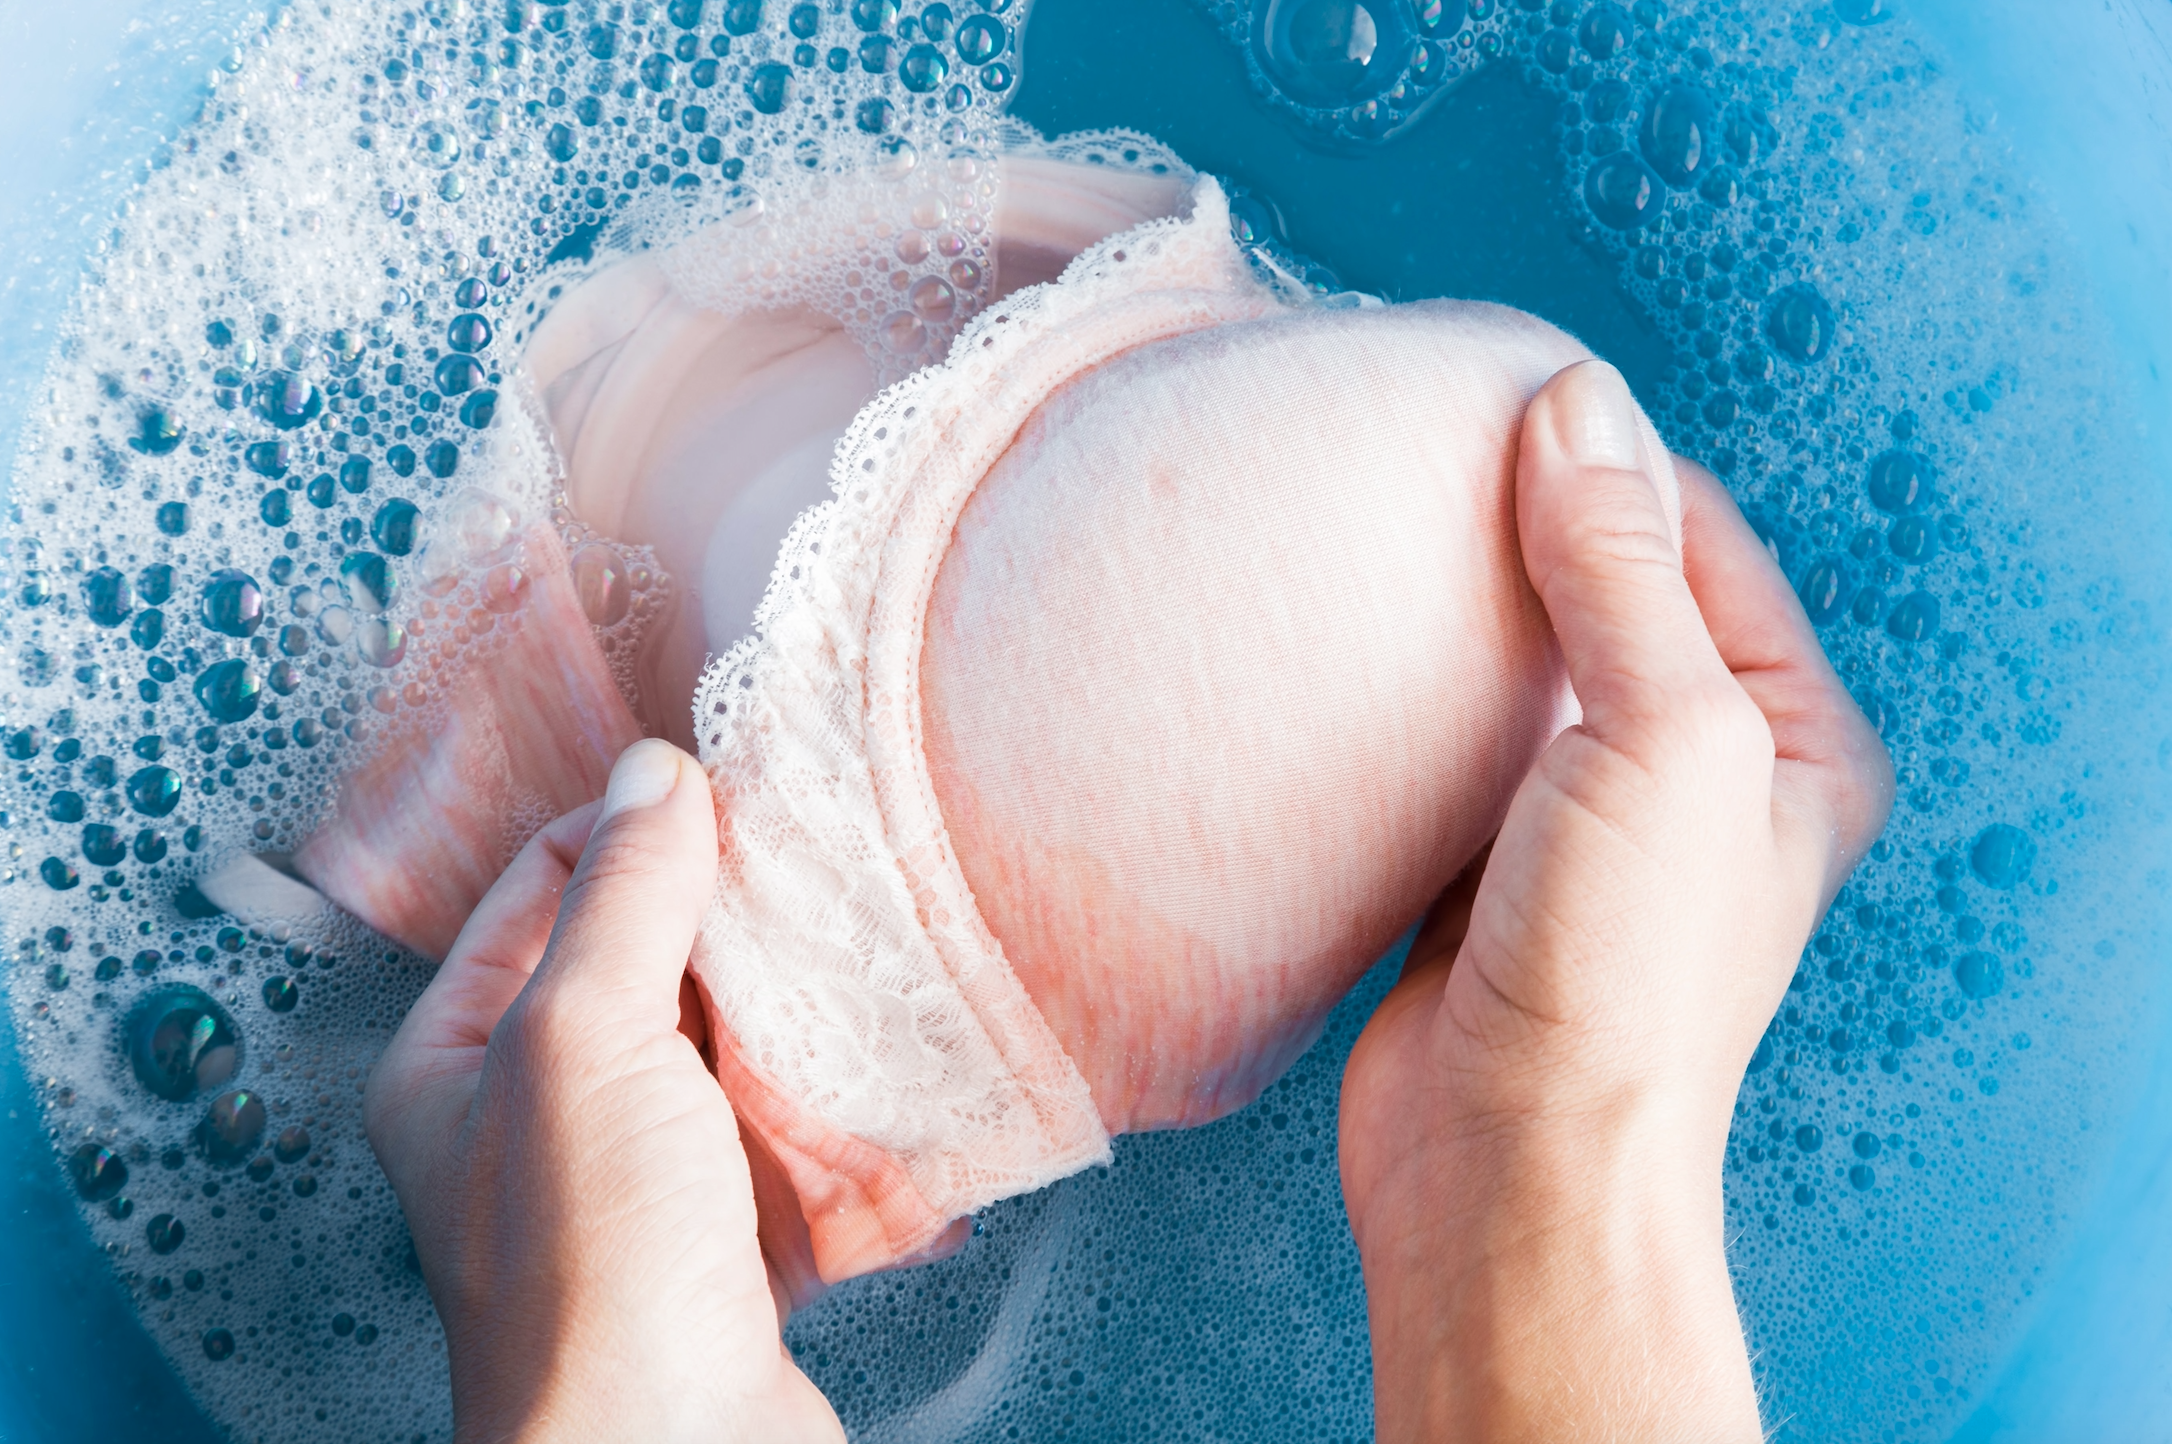 Bra Care 201: Hand-washing your bra – Embrace from Adore Me